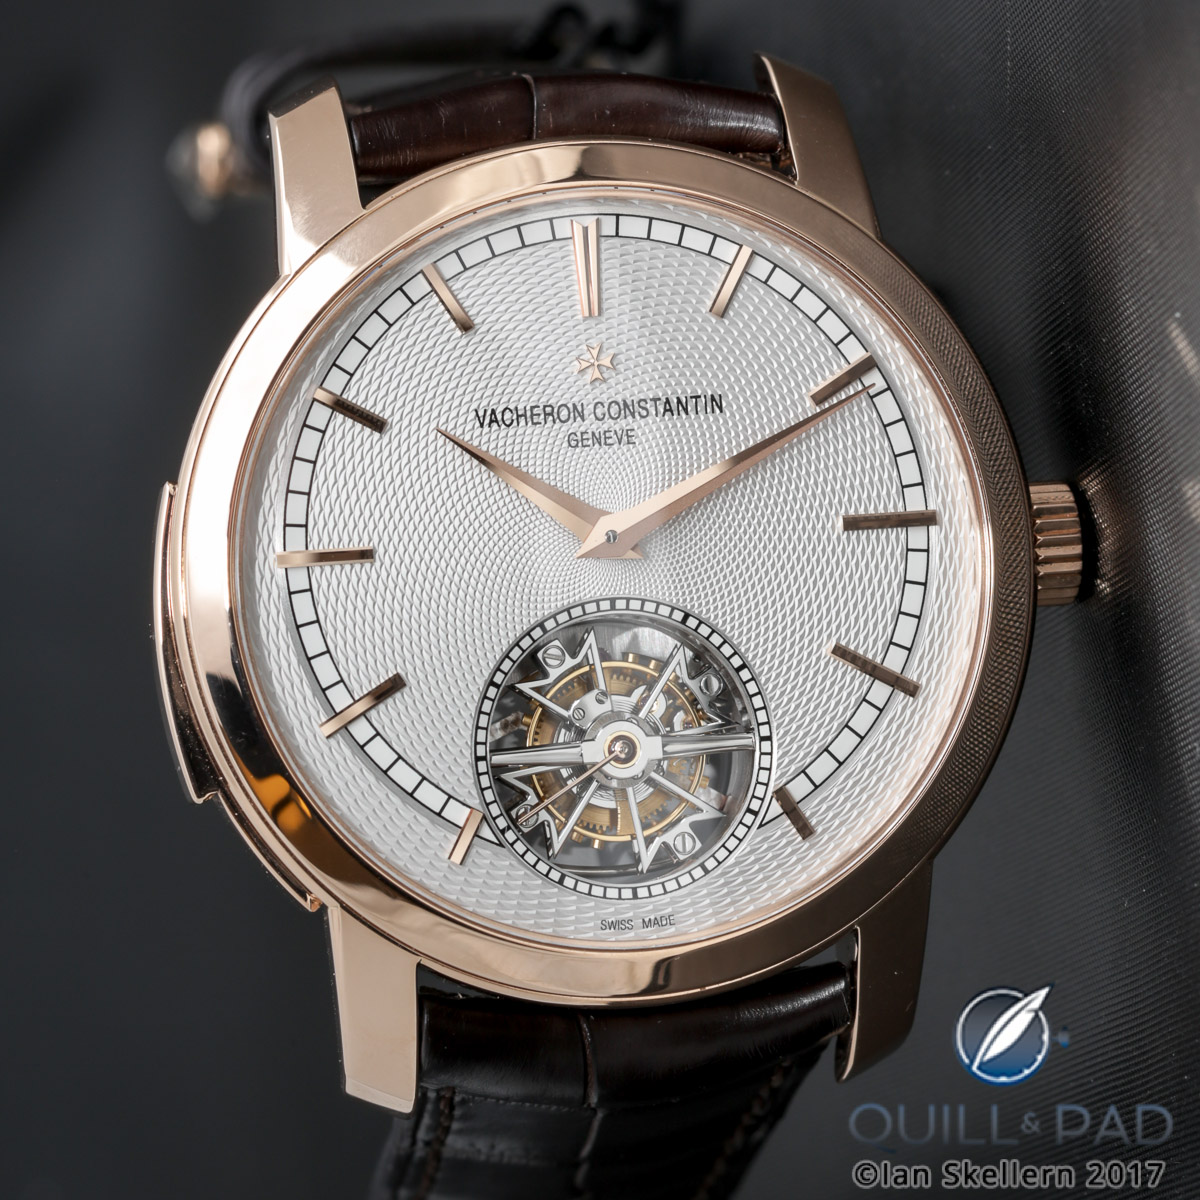 Geneva Seal certified - as are all Vacheron Constantin timepieces - Traditionnelle Minute Repeater Tourbillon